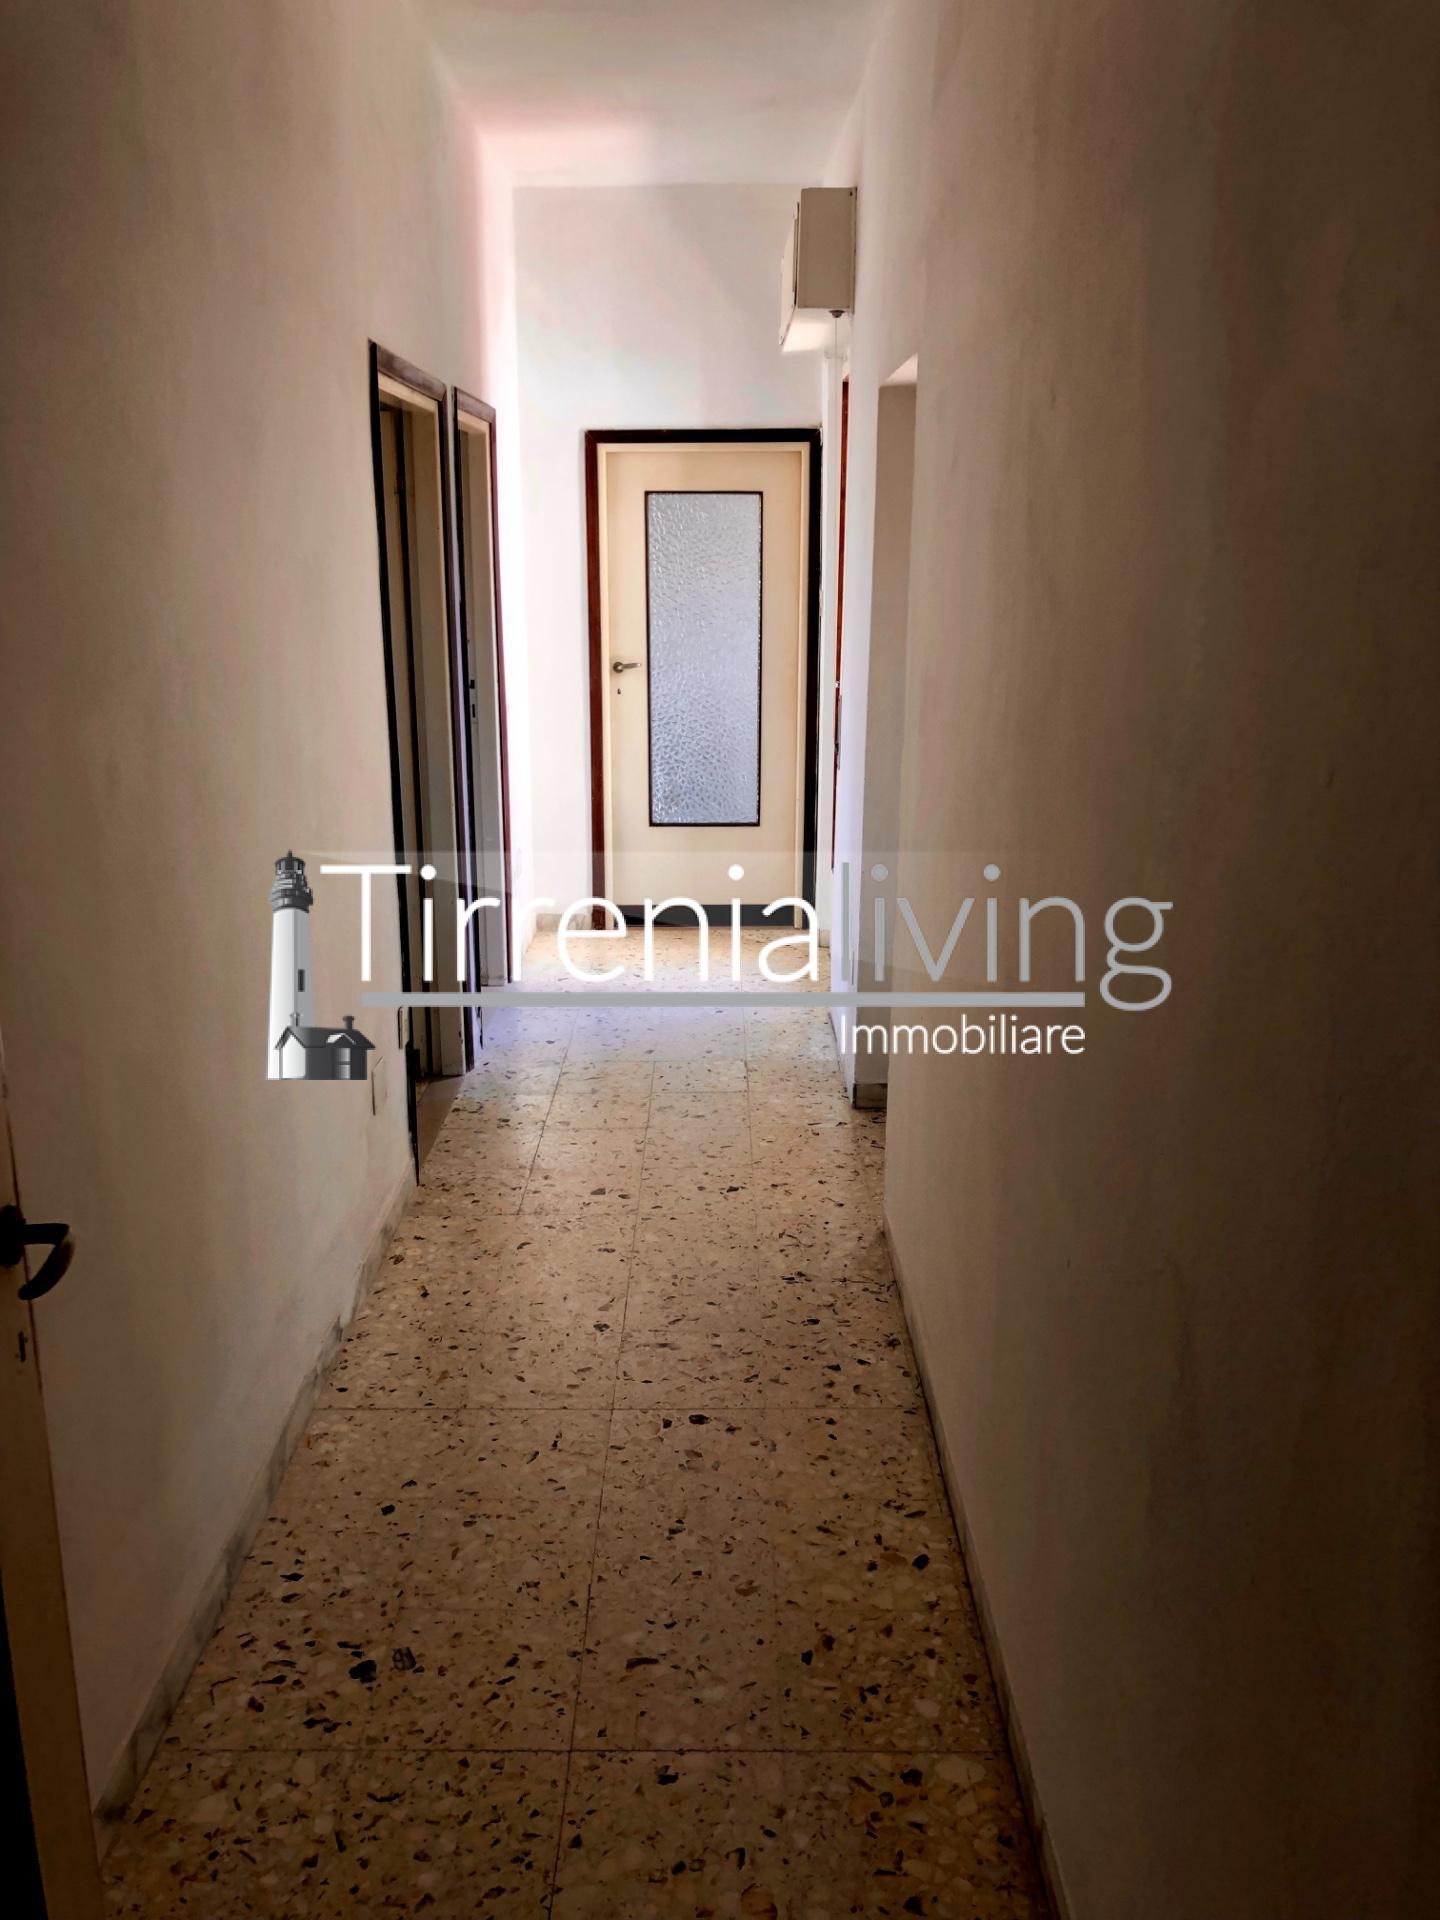 Apartment for holiday rentals, ref. A-475